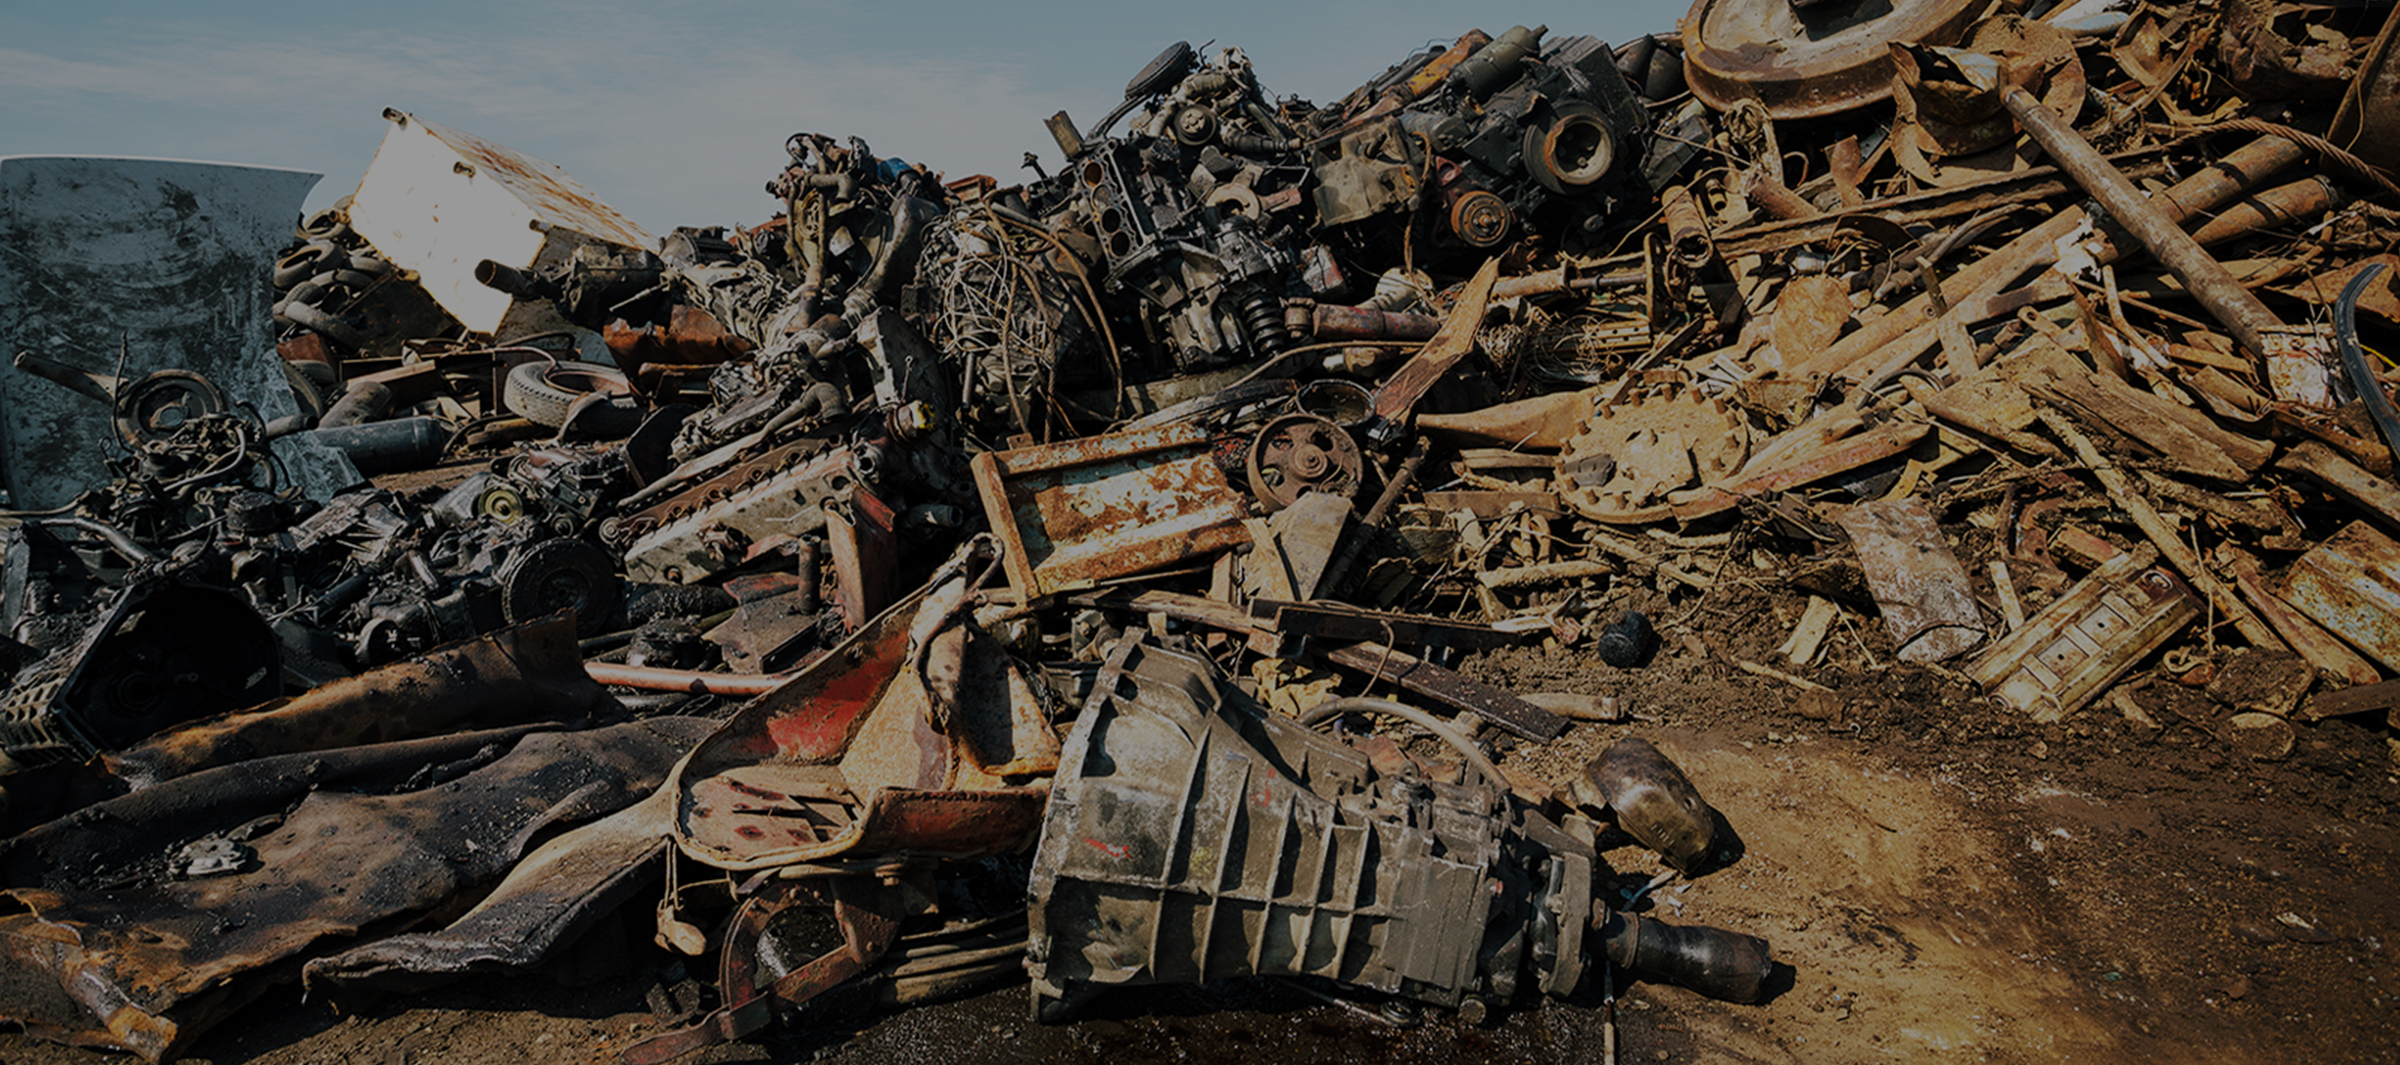 Metal Recycling Business